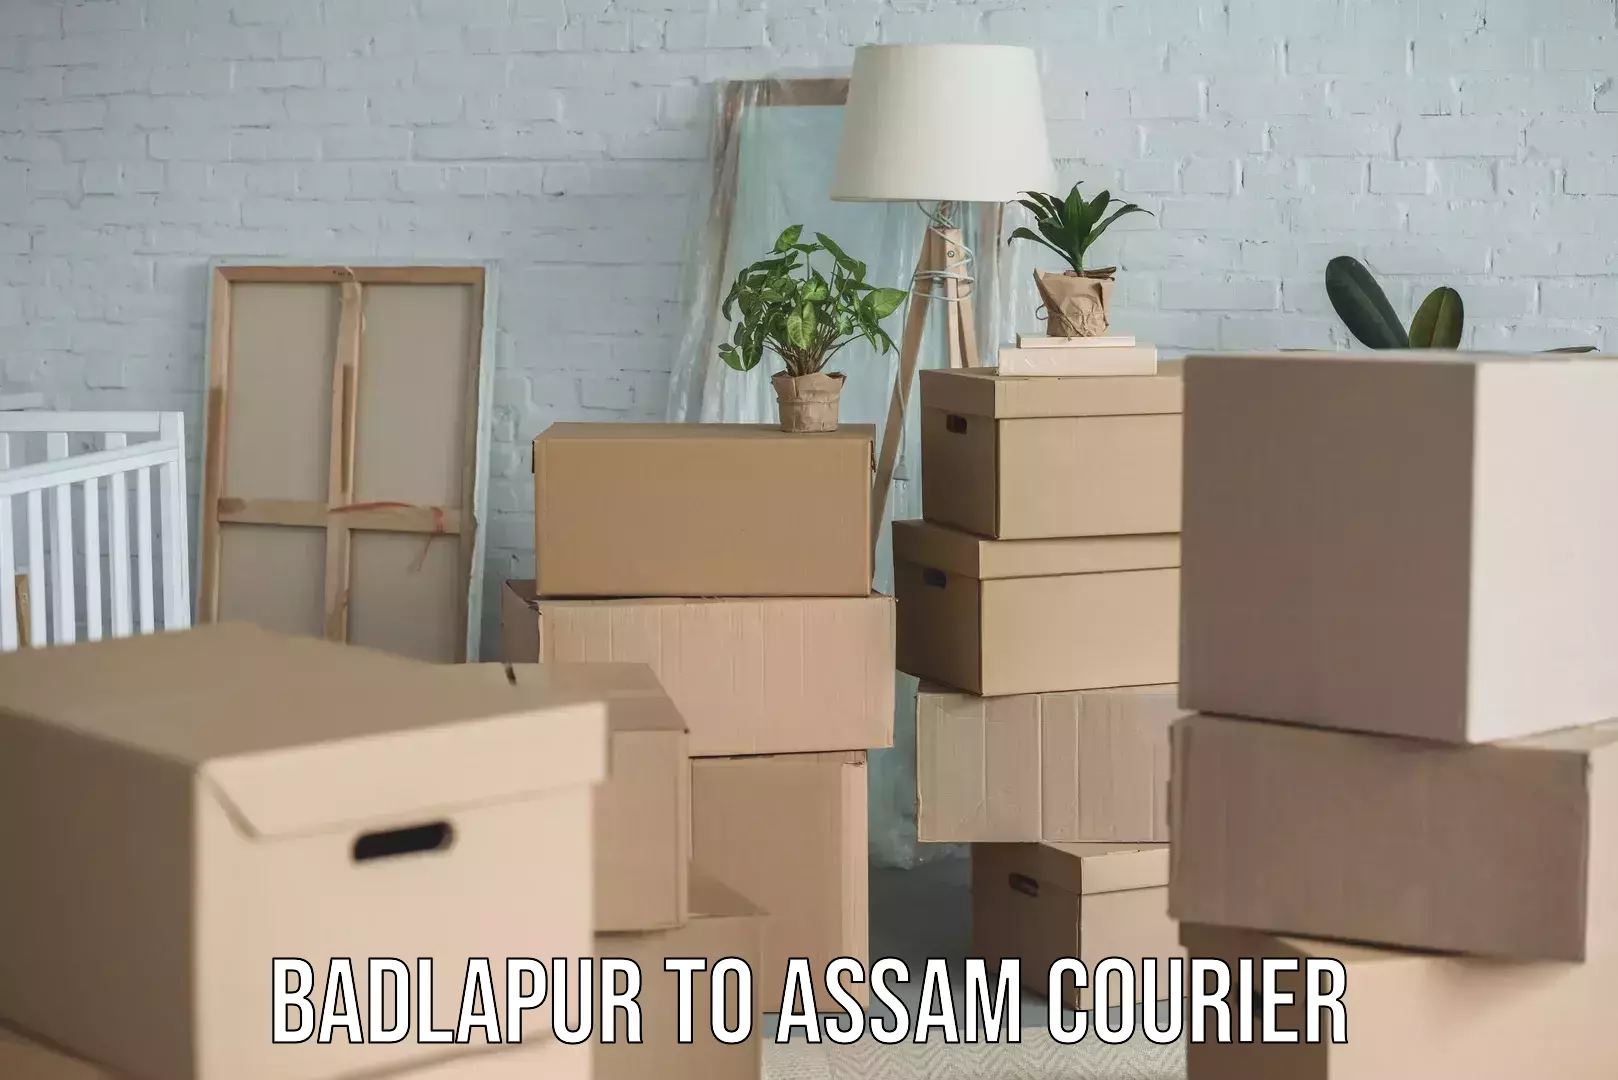 Nationwide delivery network Badlapur to Assam